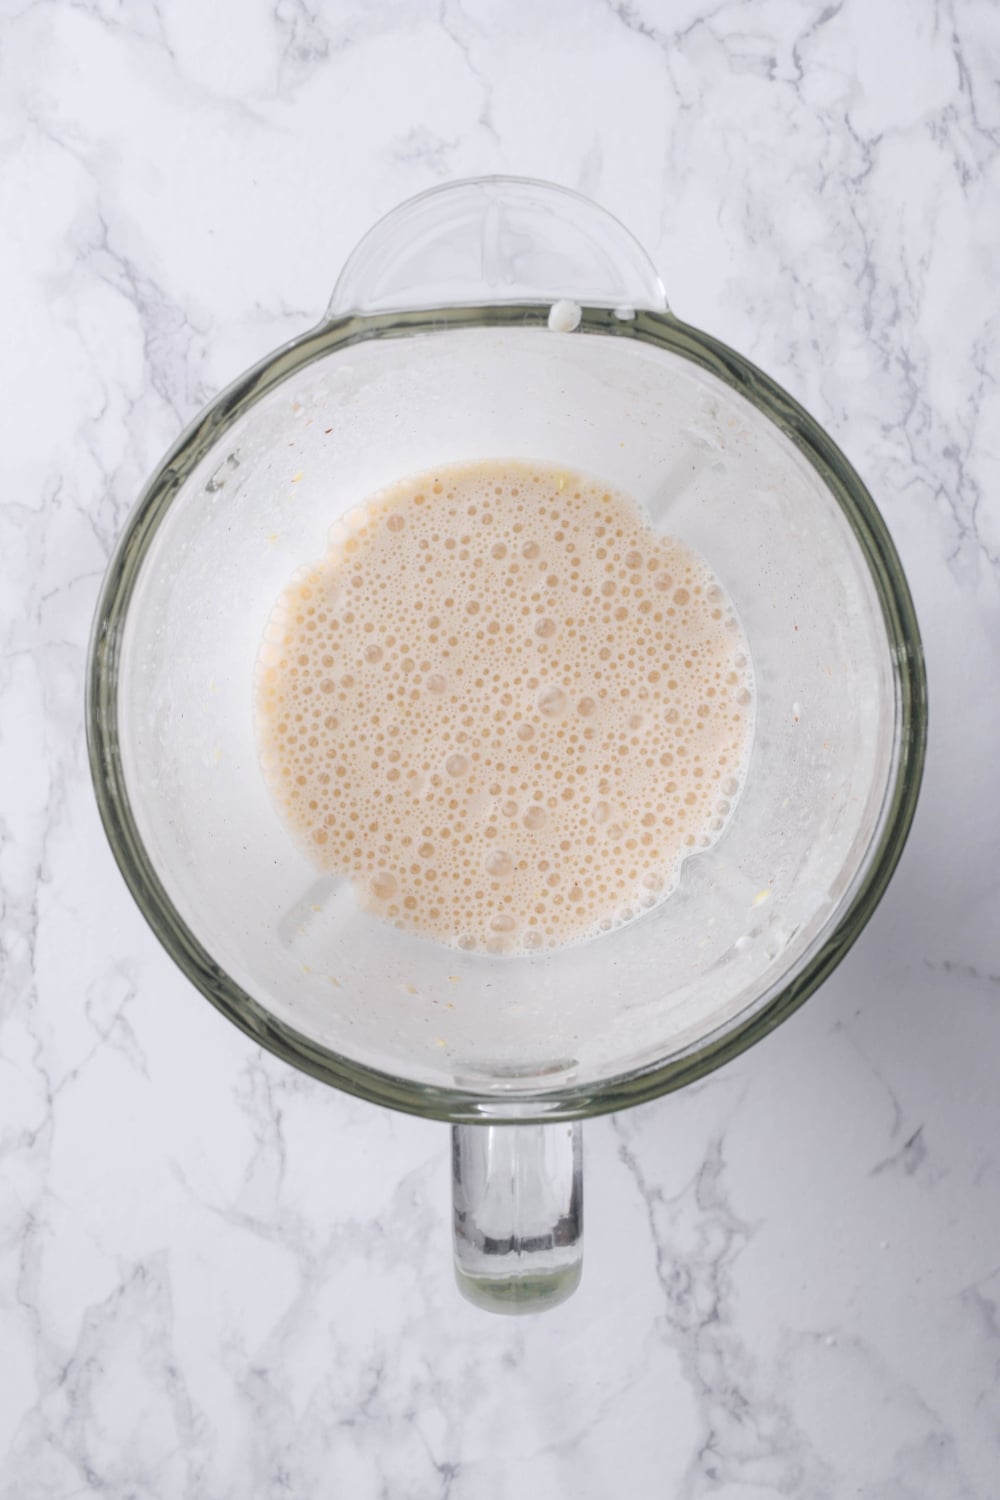 A banana protein shake in a blender.